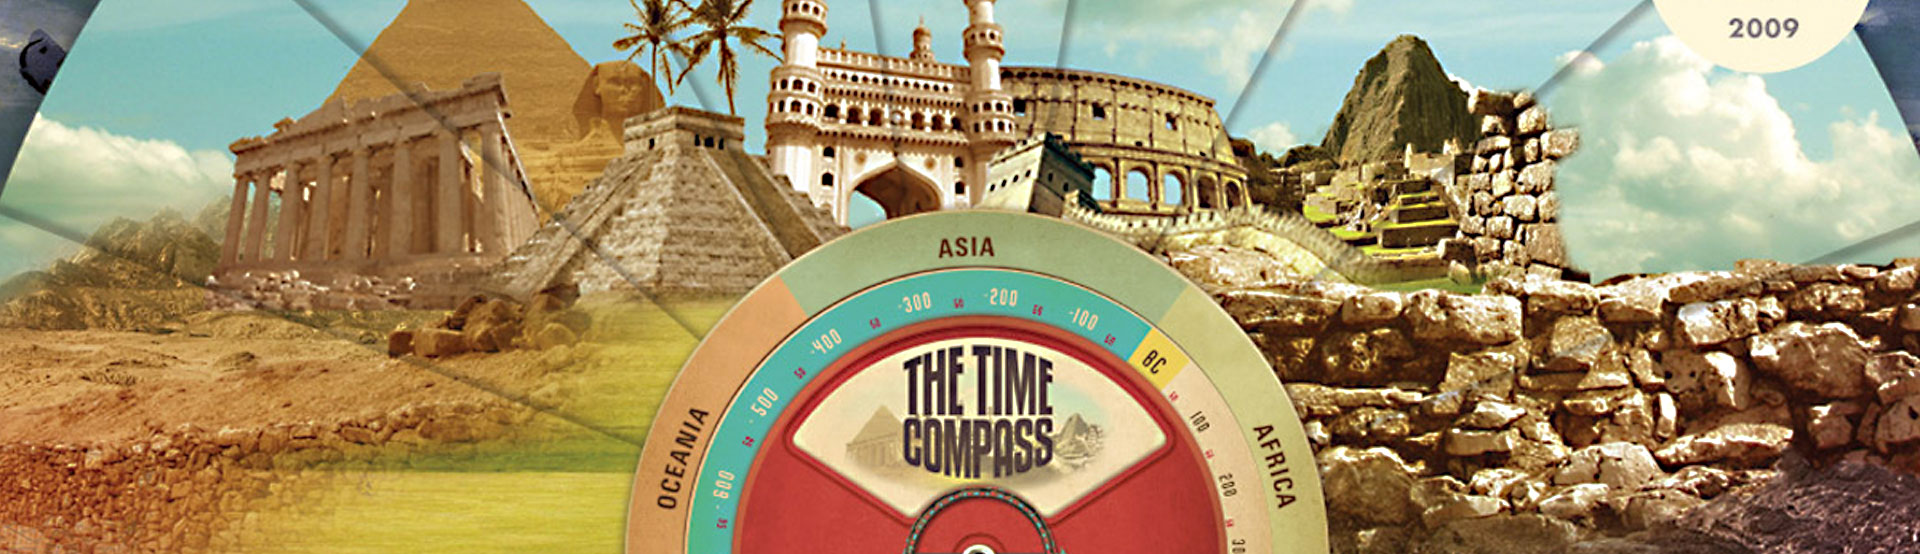 The Time Compass